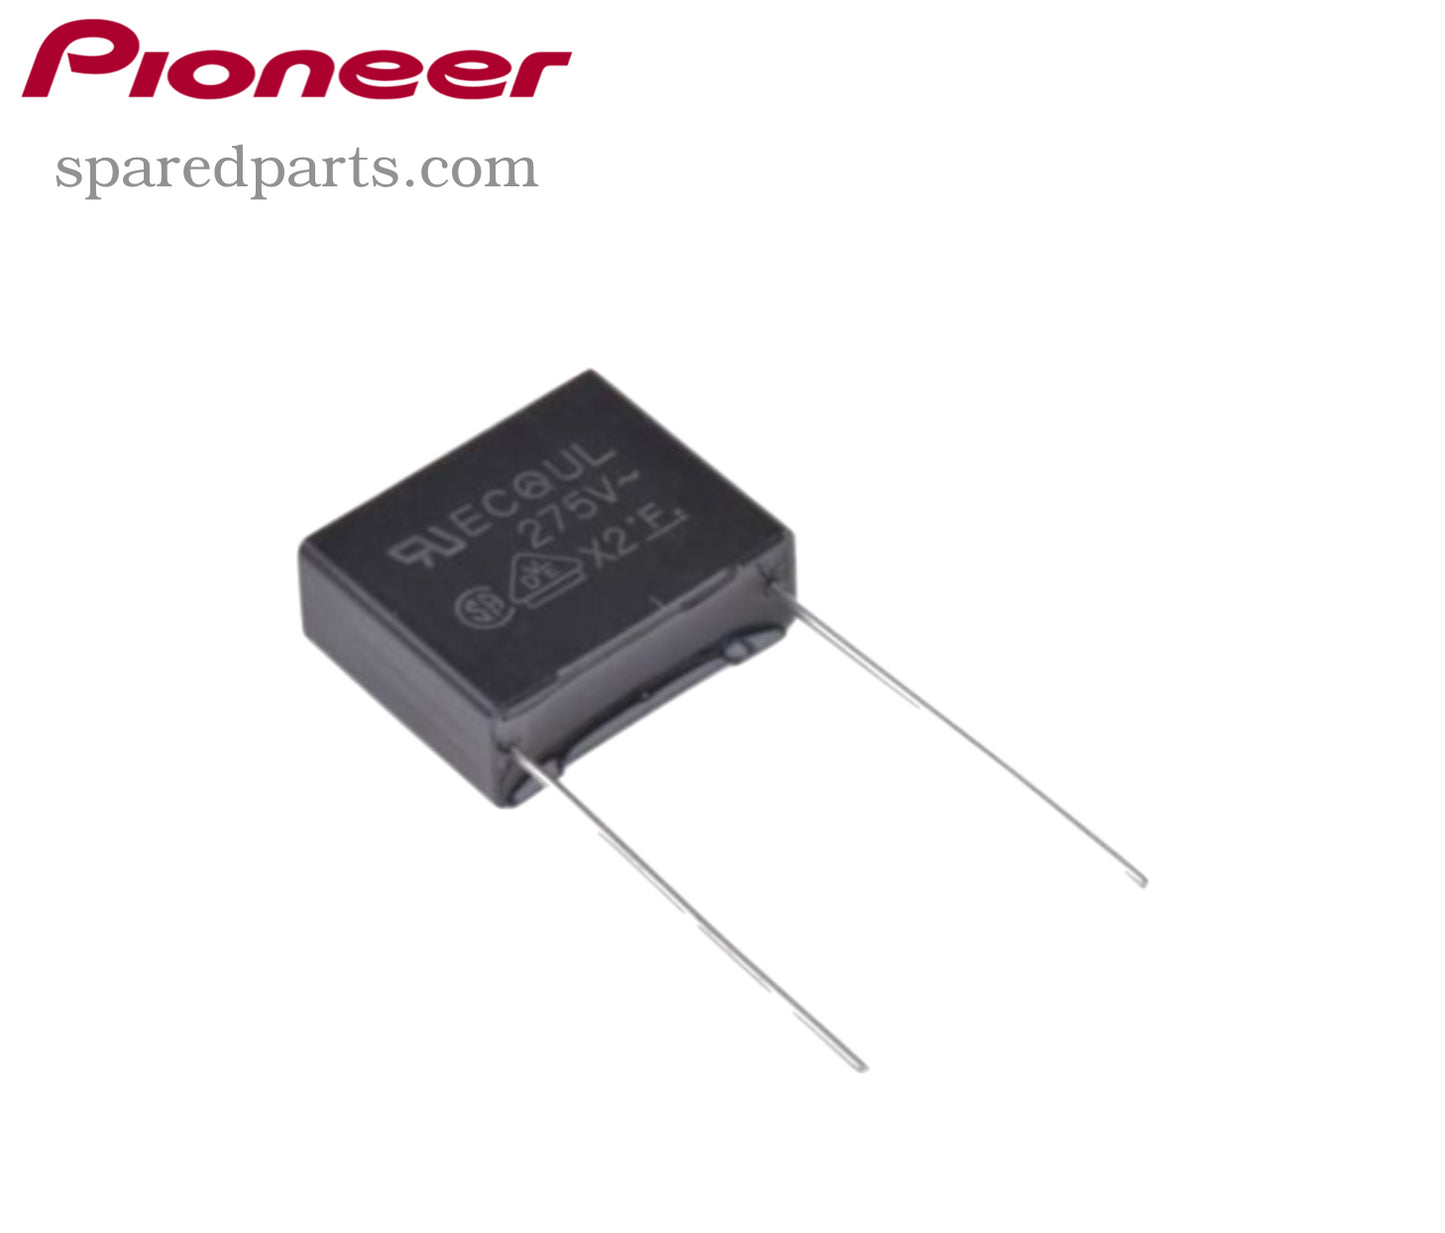 Pioneer PL12D/E Motor Capacitor 0.047uF 47nF